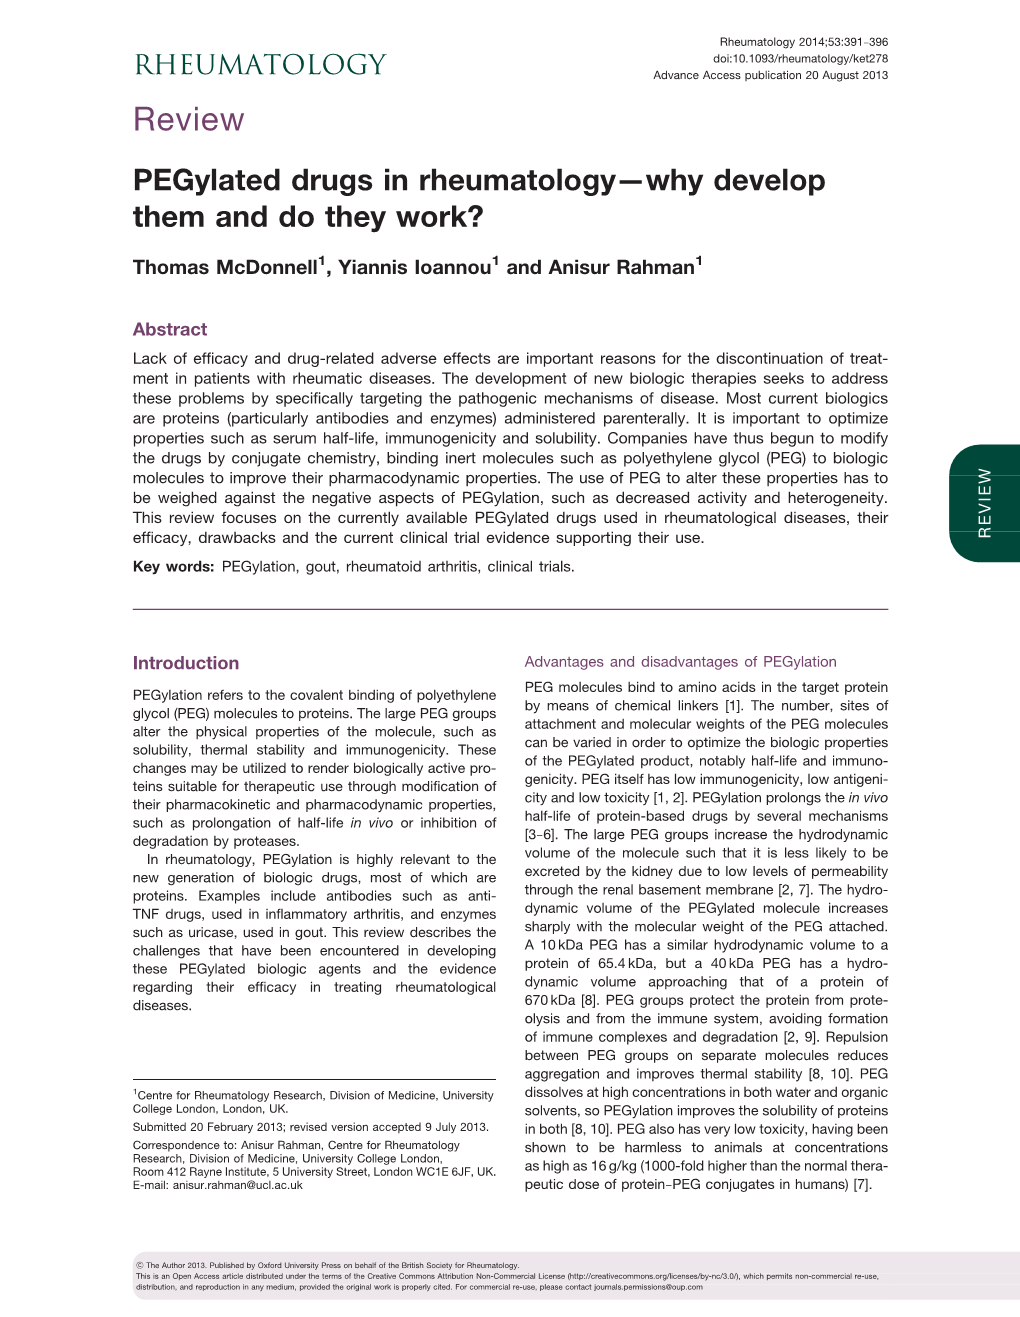 Pegylated Drugs in Rheumatology—Why Develop Them and Do They Work?